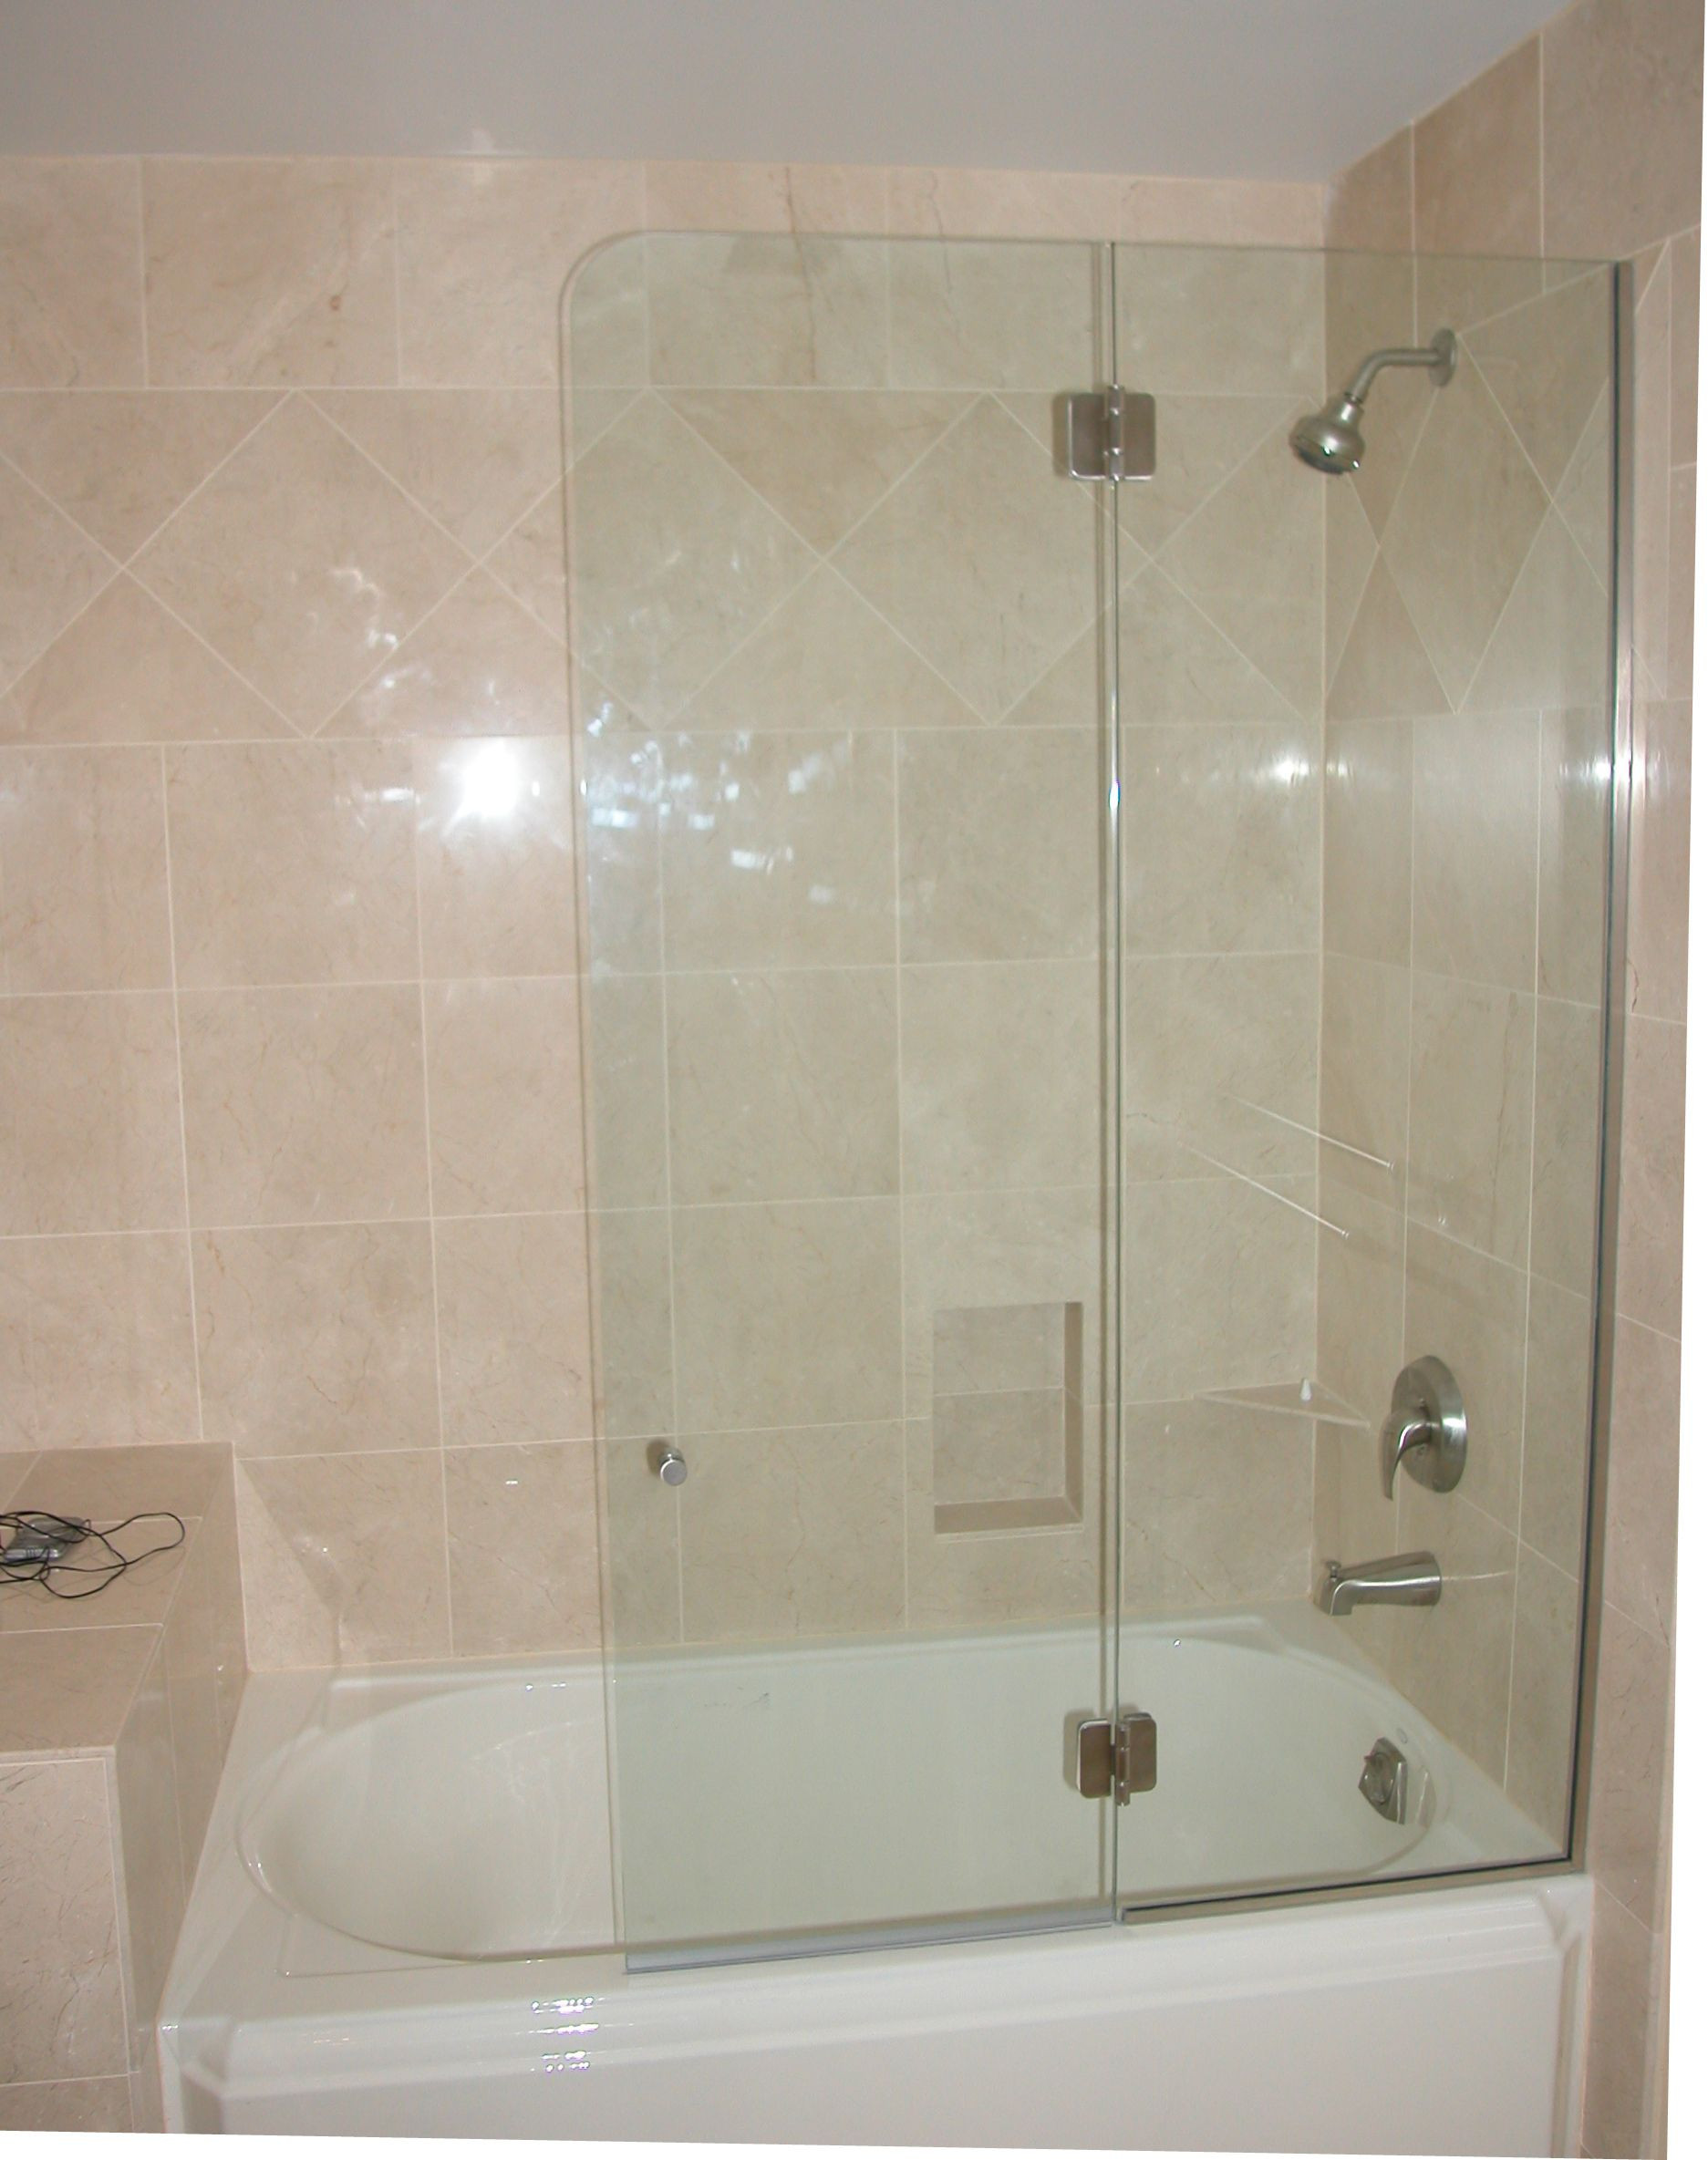 Bathroom Shower Panels
 Shower Glass Panel Ideas for a Small Bathroom at Your